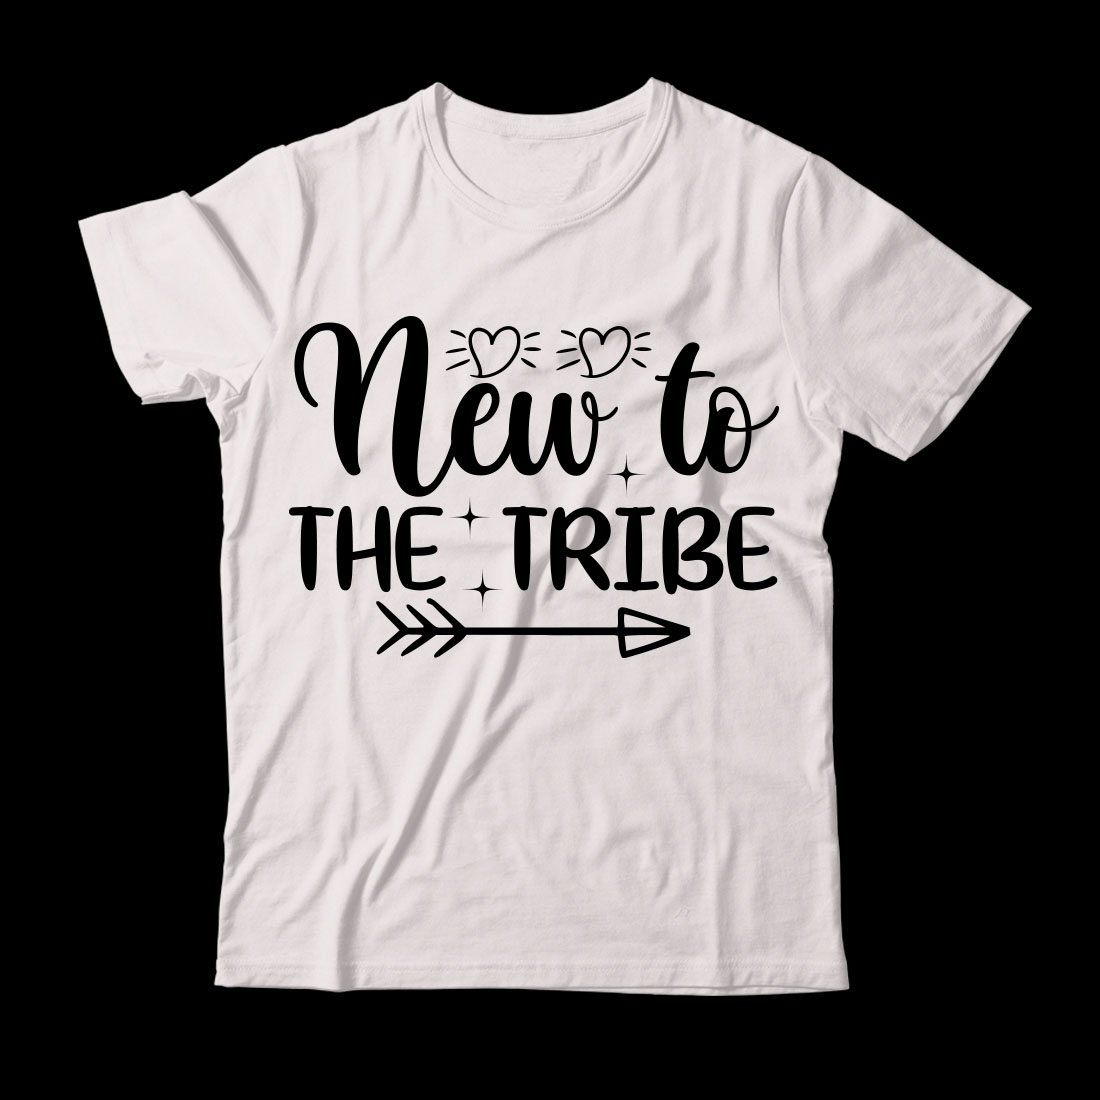 White t - shirt that says new to the tribe.